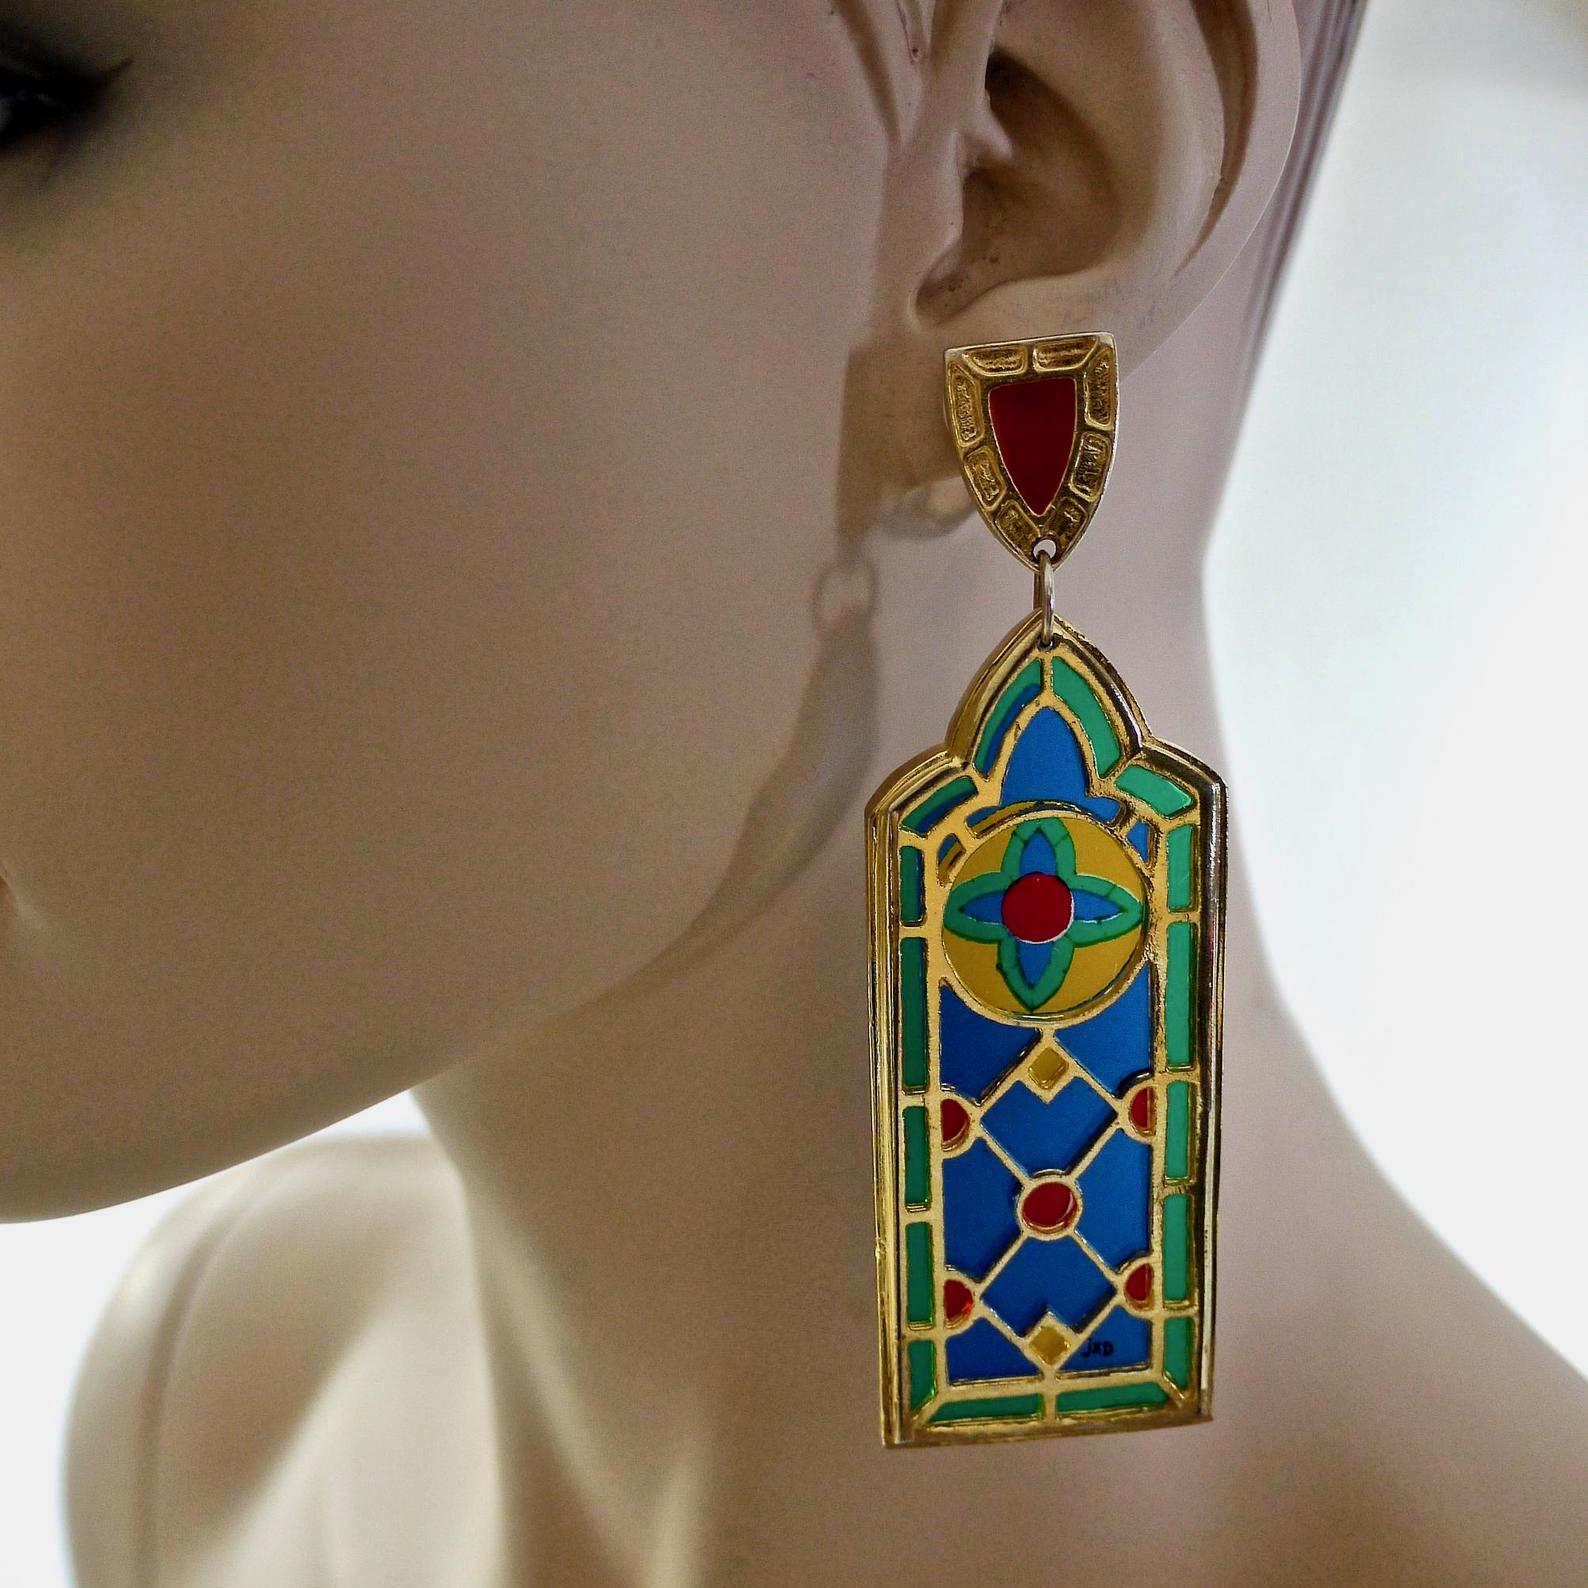 Vintage JEAN XAVIER DUHART Cathedral Stained Glass Window Earrings

Measurements:
Height: 3.77 inches (9.6 cm)
Width: 1.22 inches (3.1 cm)


Features:
- 100% Authentic JEAN XAVIER DUHART.
- Cathedral stained glass window novelty earrings.
- Gold